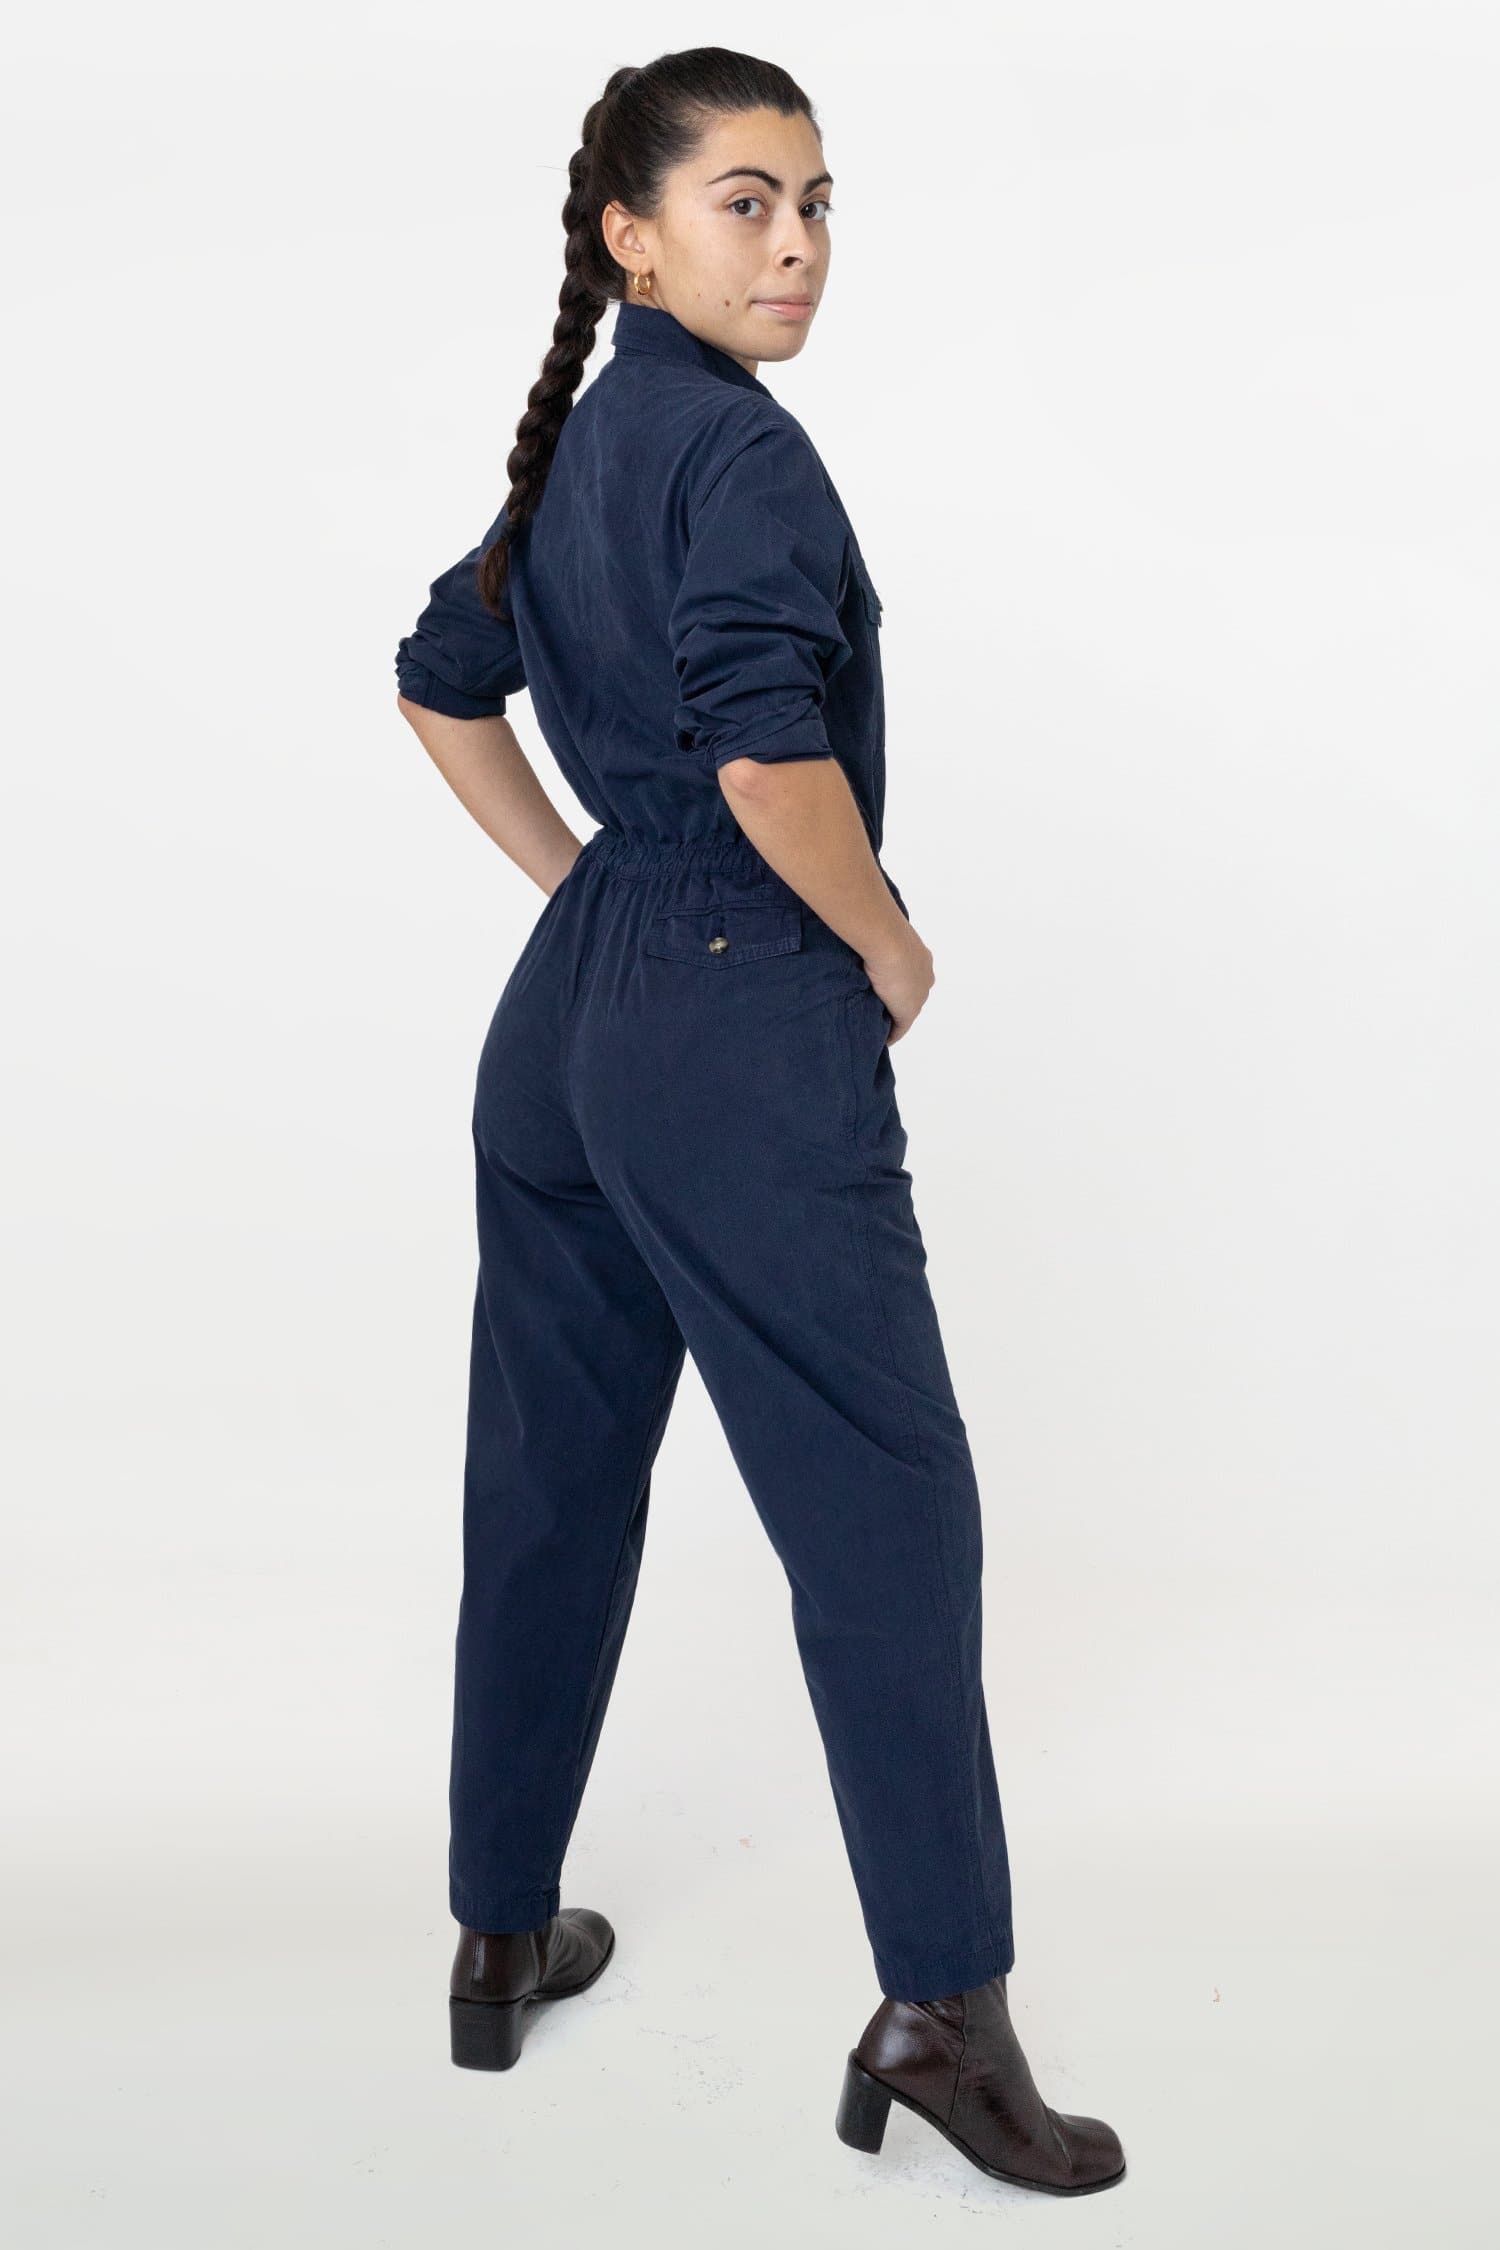 Retro Denim Jumpsuit Flared Overalls | Alternative outfits, Free people  denim, Colorful fashion